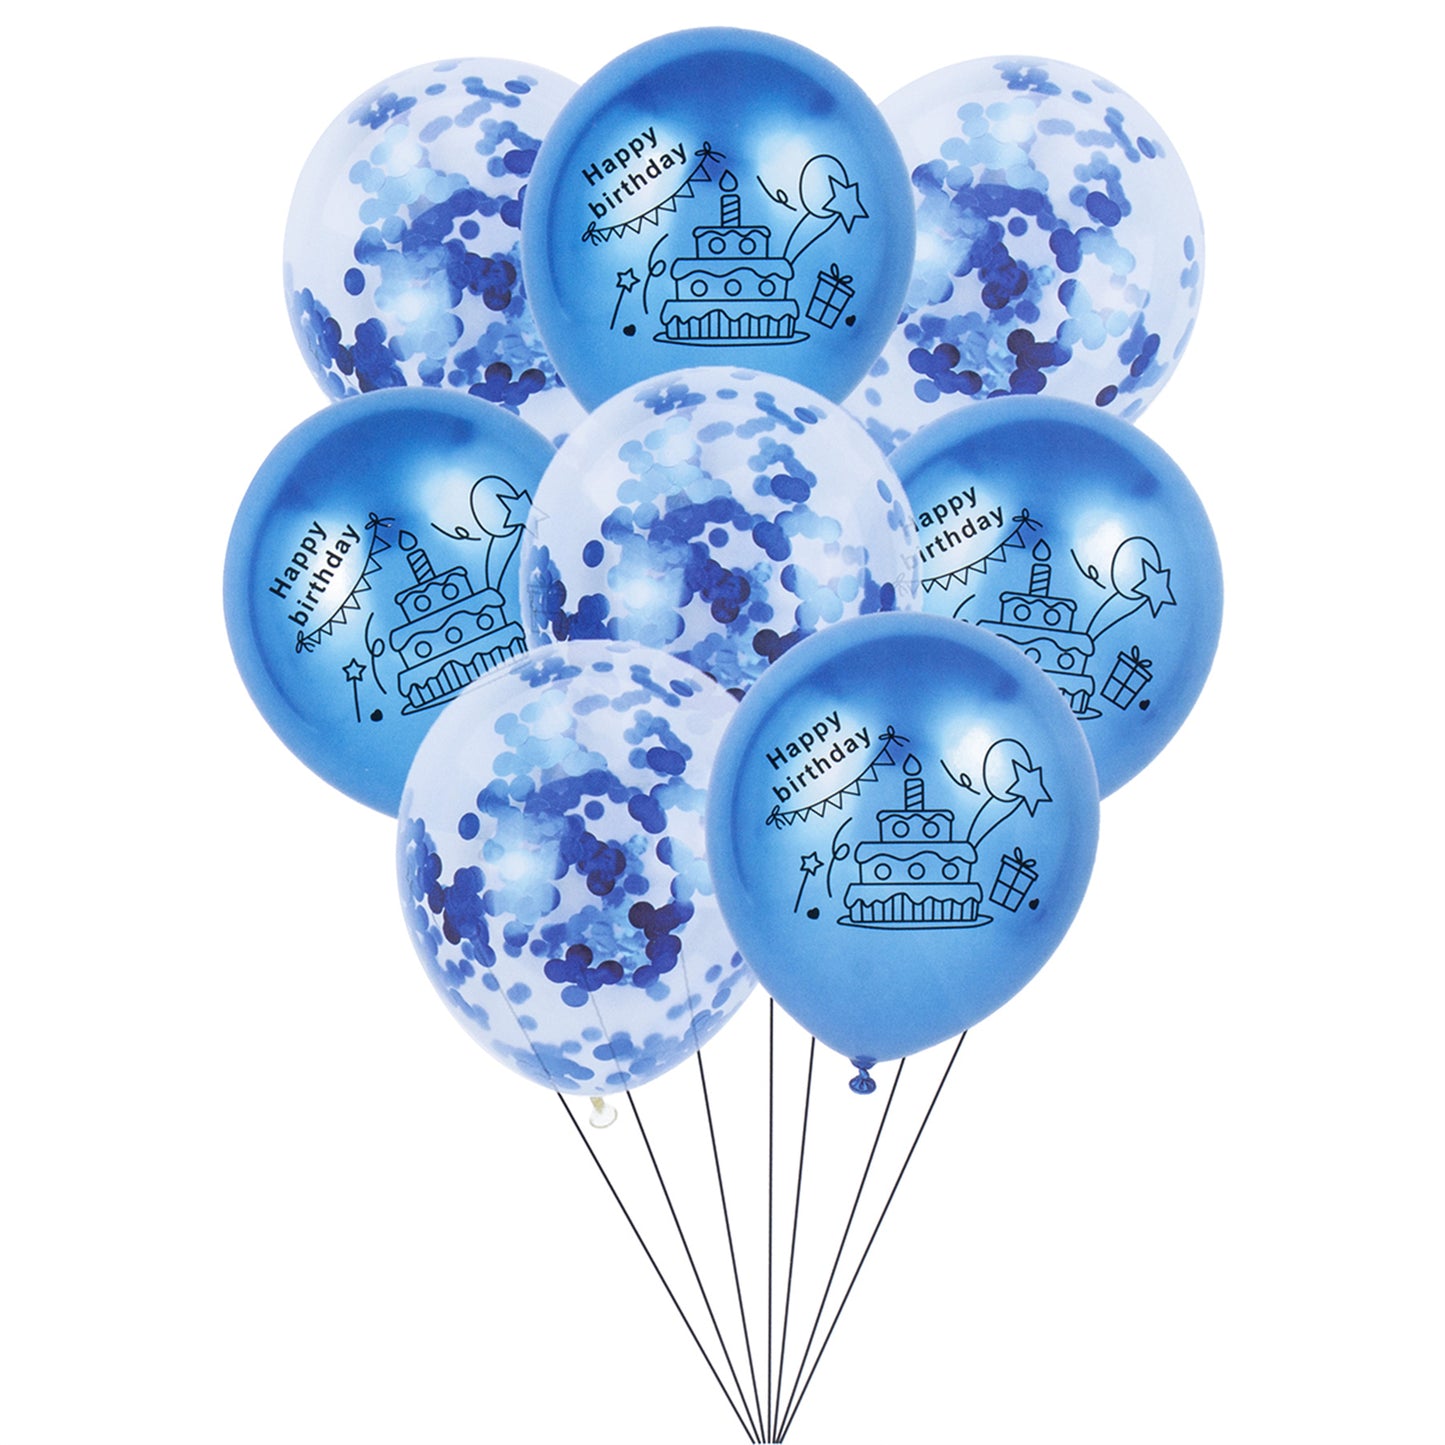 Party balloon boy decorations and girl decorations